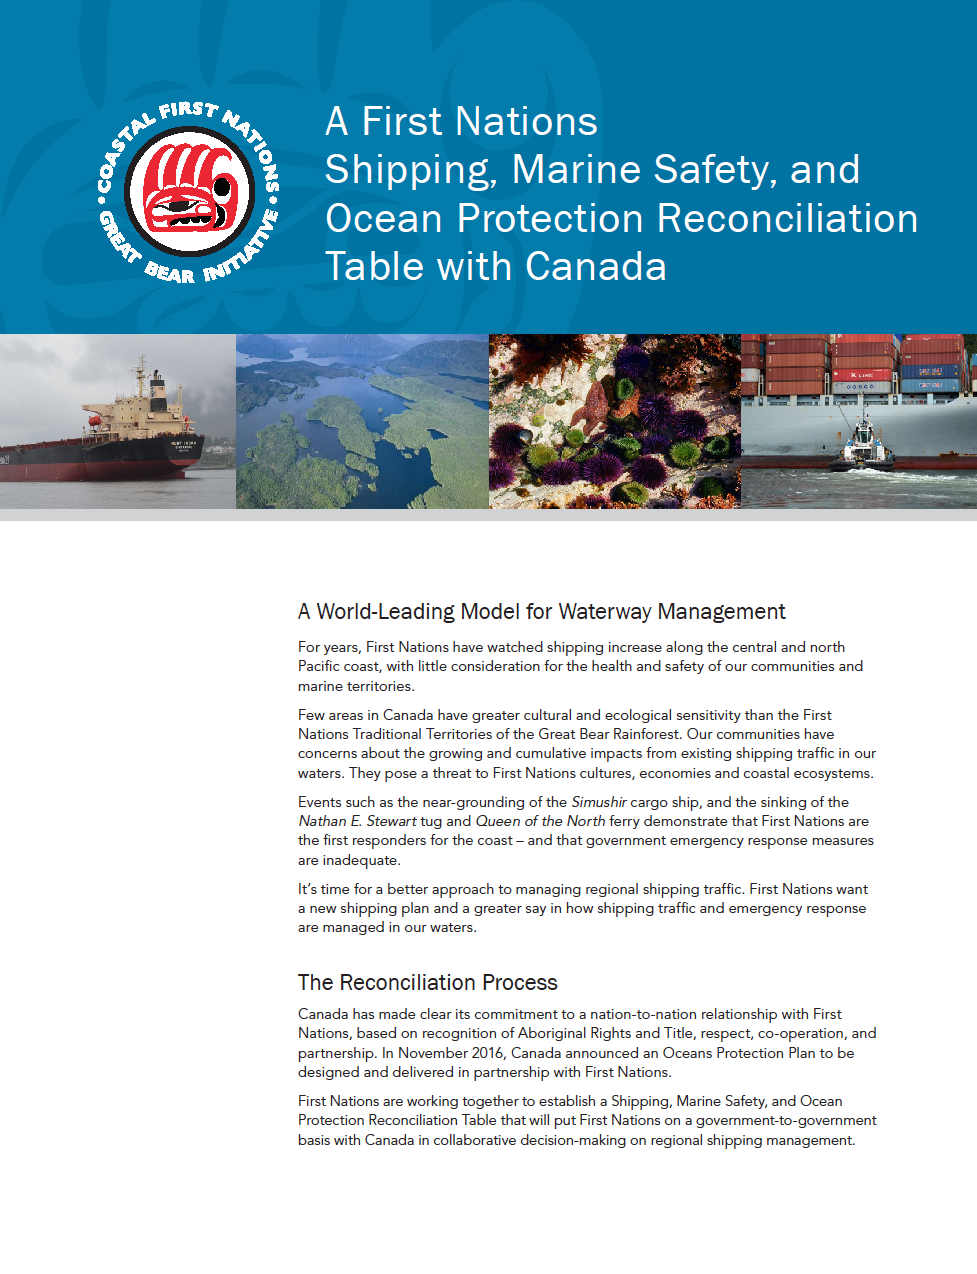 Shipping, Marine Safety, and Ocean Protection Reconciliation Table with Canada